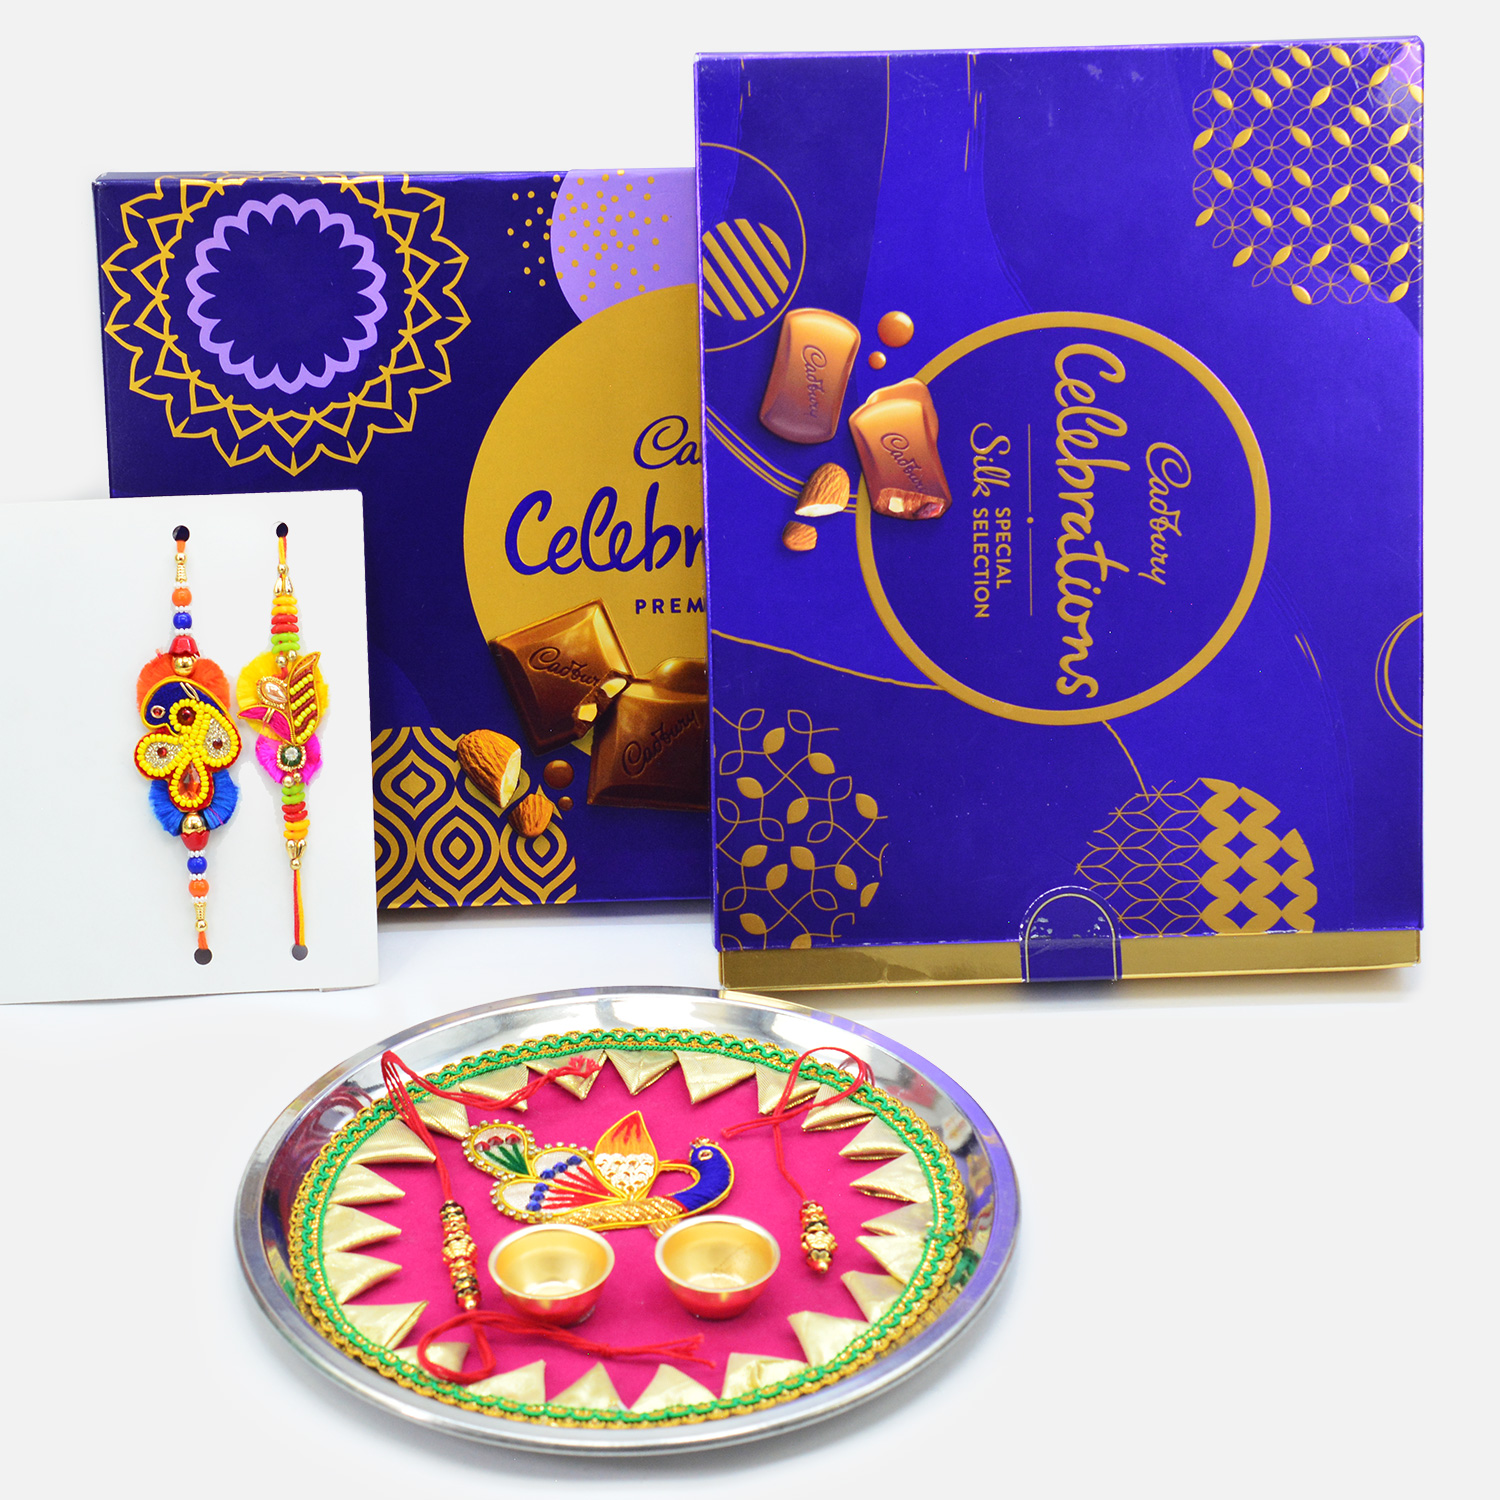 New Silk Edition Big and Small Celebration Chocolate with Rakhis and Pink Base Puja Thali